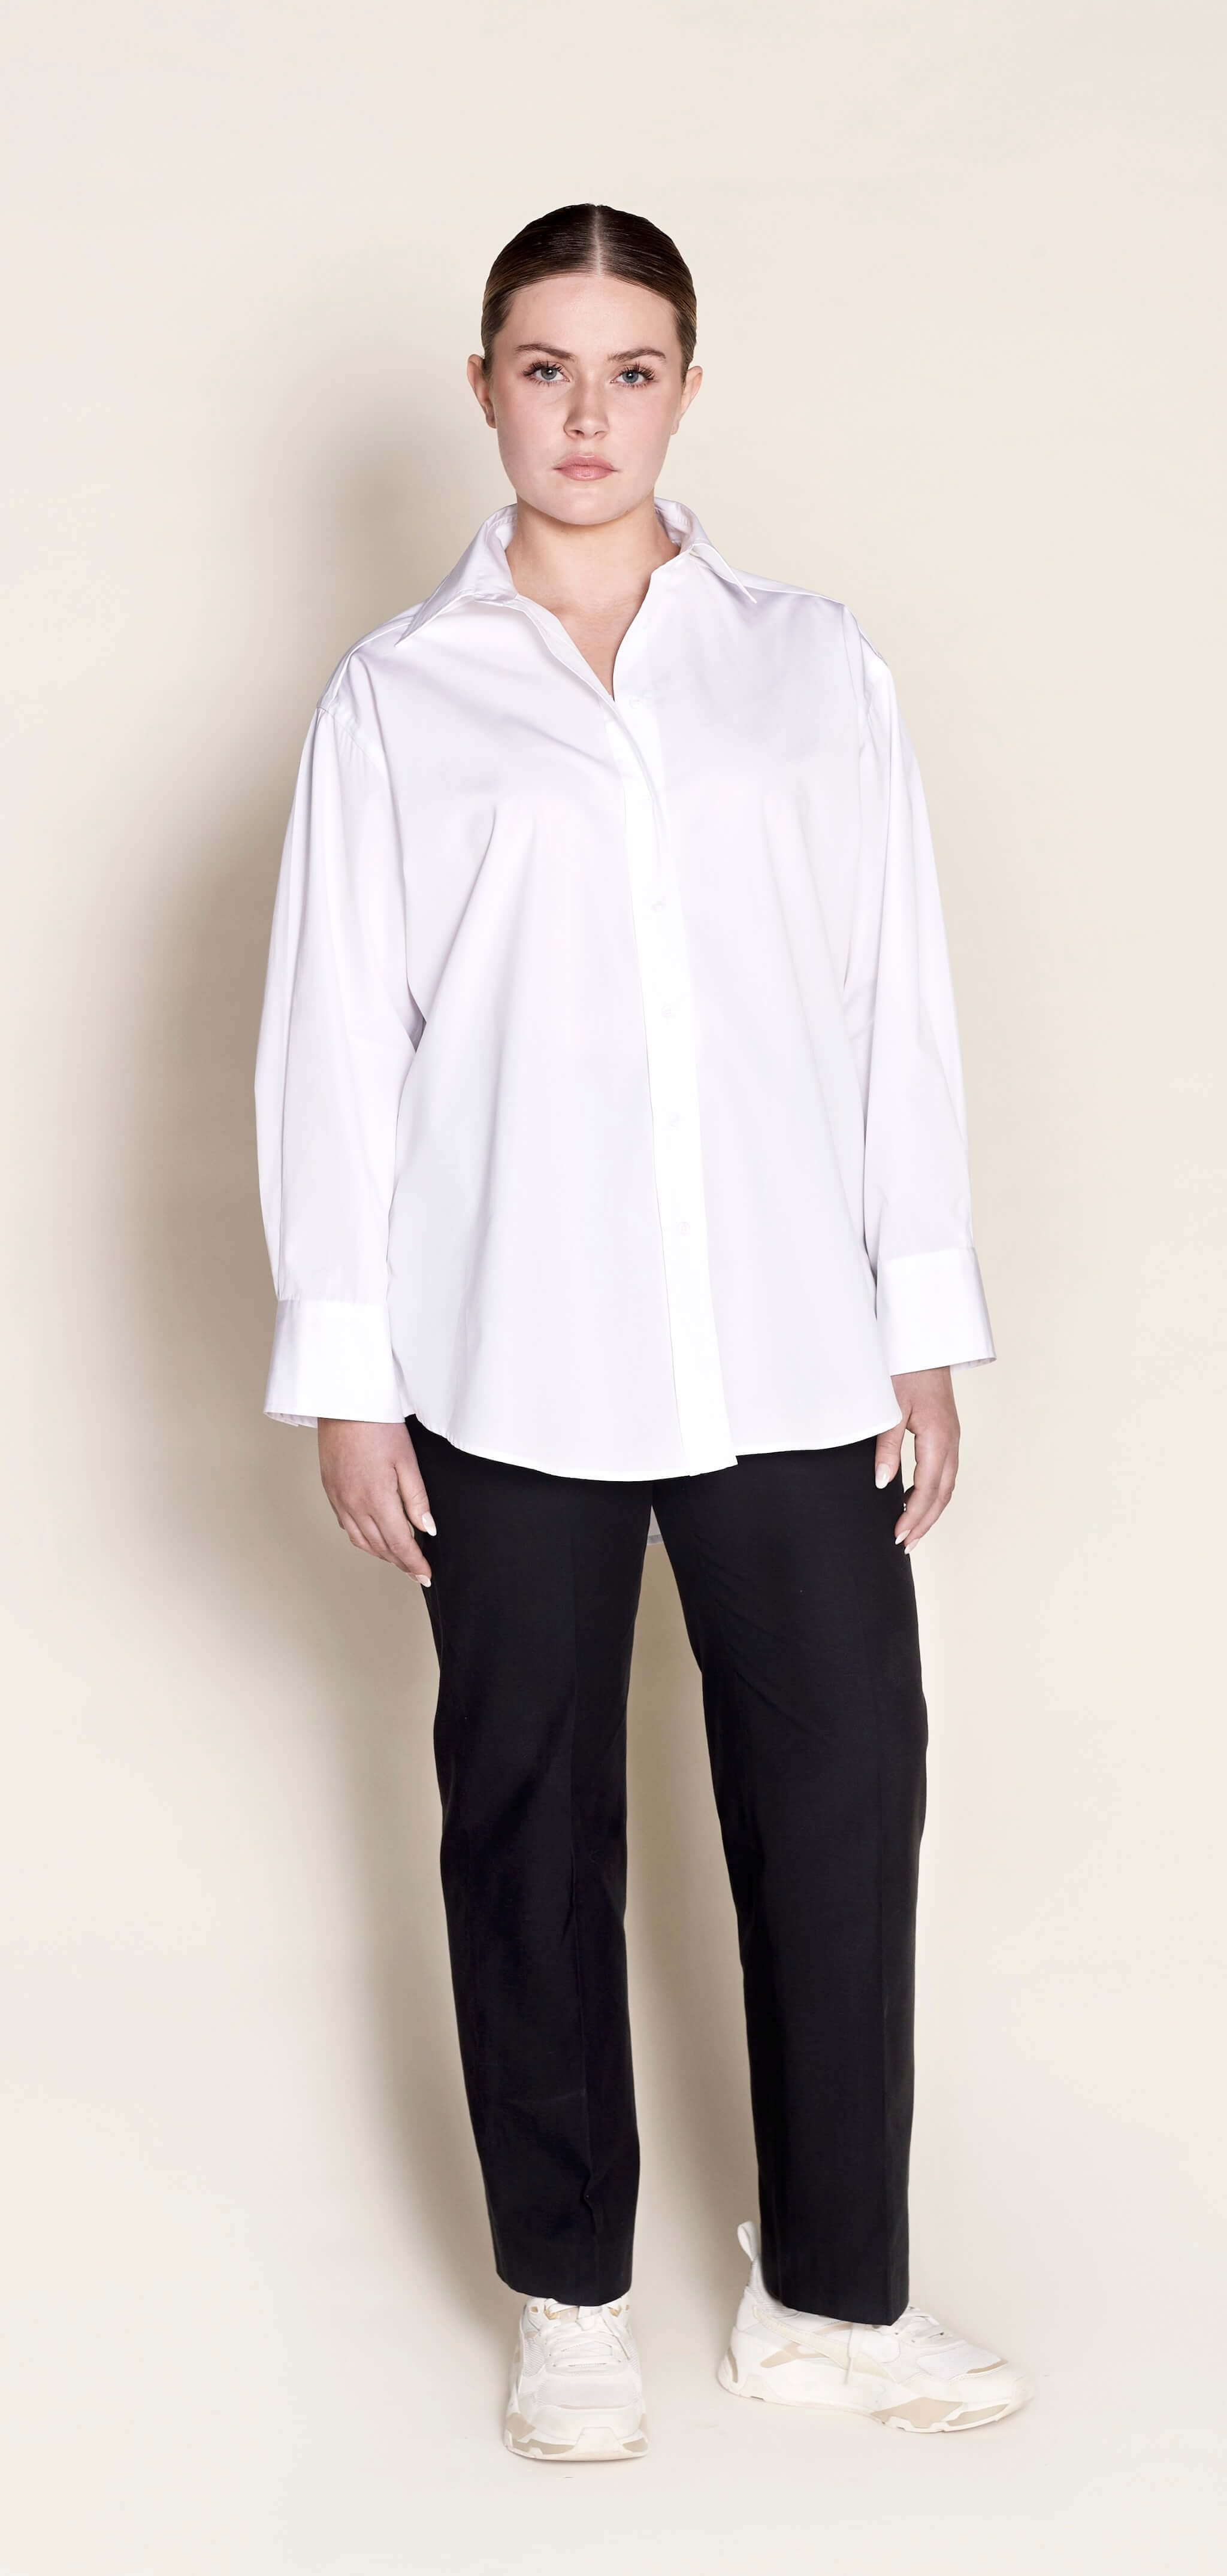 Model in a Cyme Copenhagen classic white button-up shirt paired with black trousers, showcasing a crisp, professional look that captures the essence of Scandinavian minimalist design.